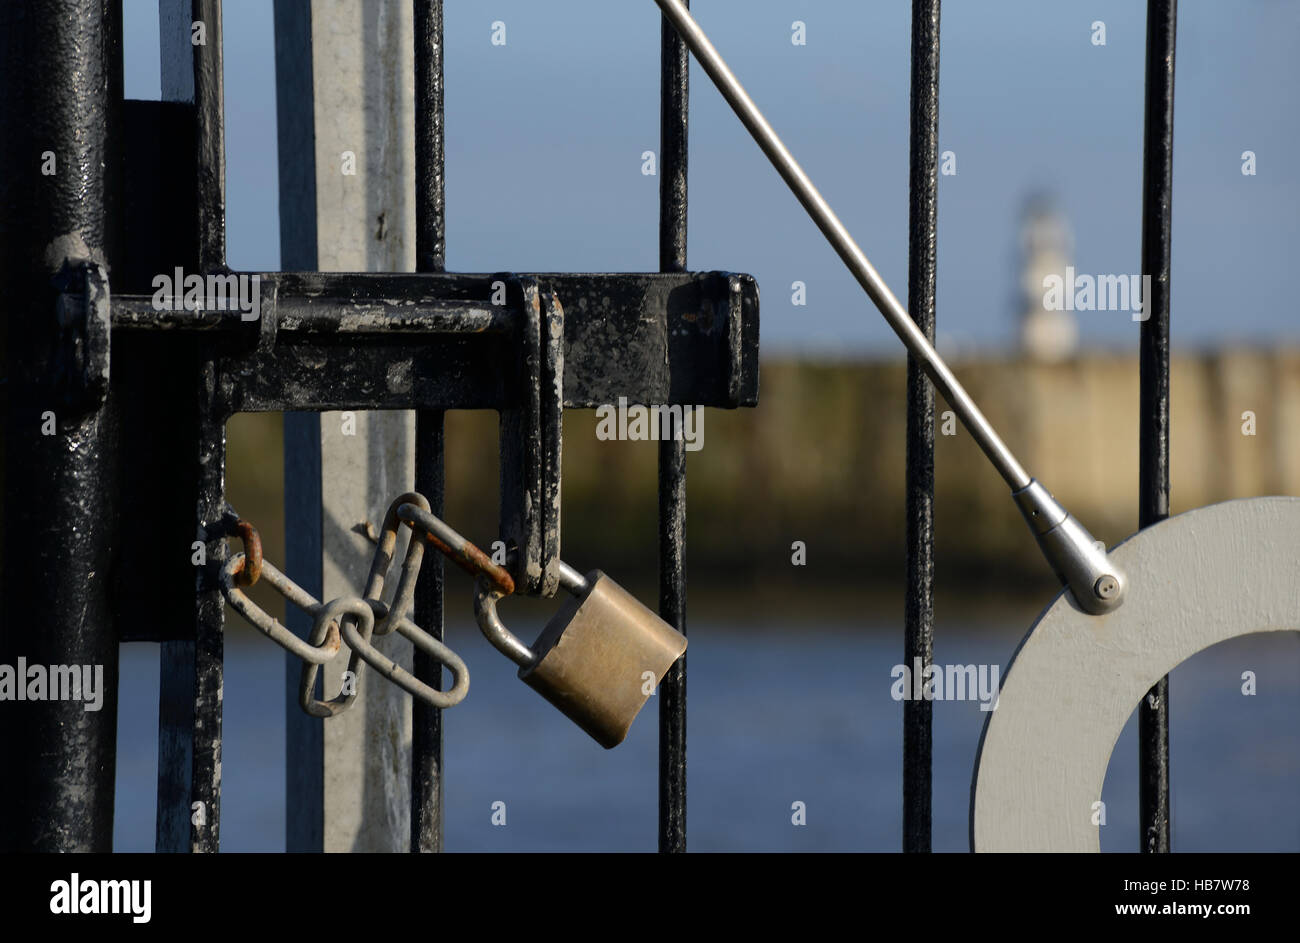 Padlock and chain on gate preventing access with lighthouse in background Stock Photo